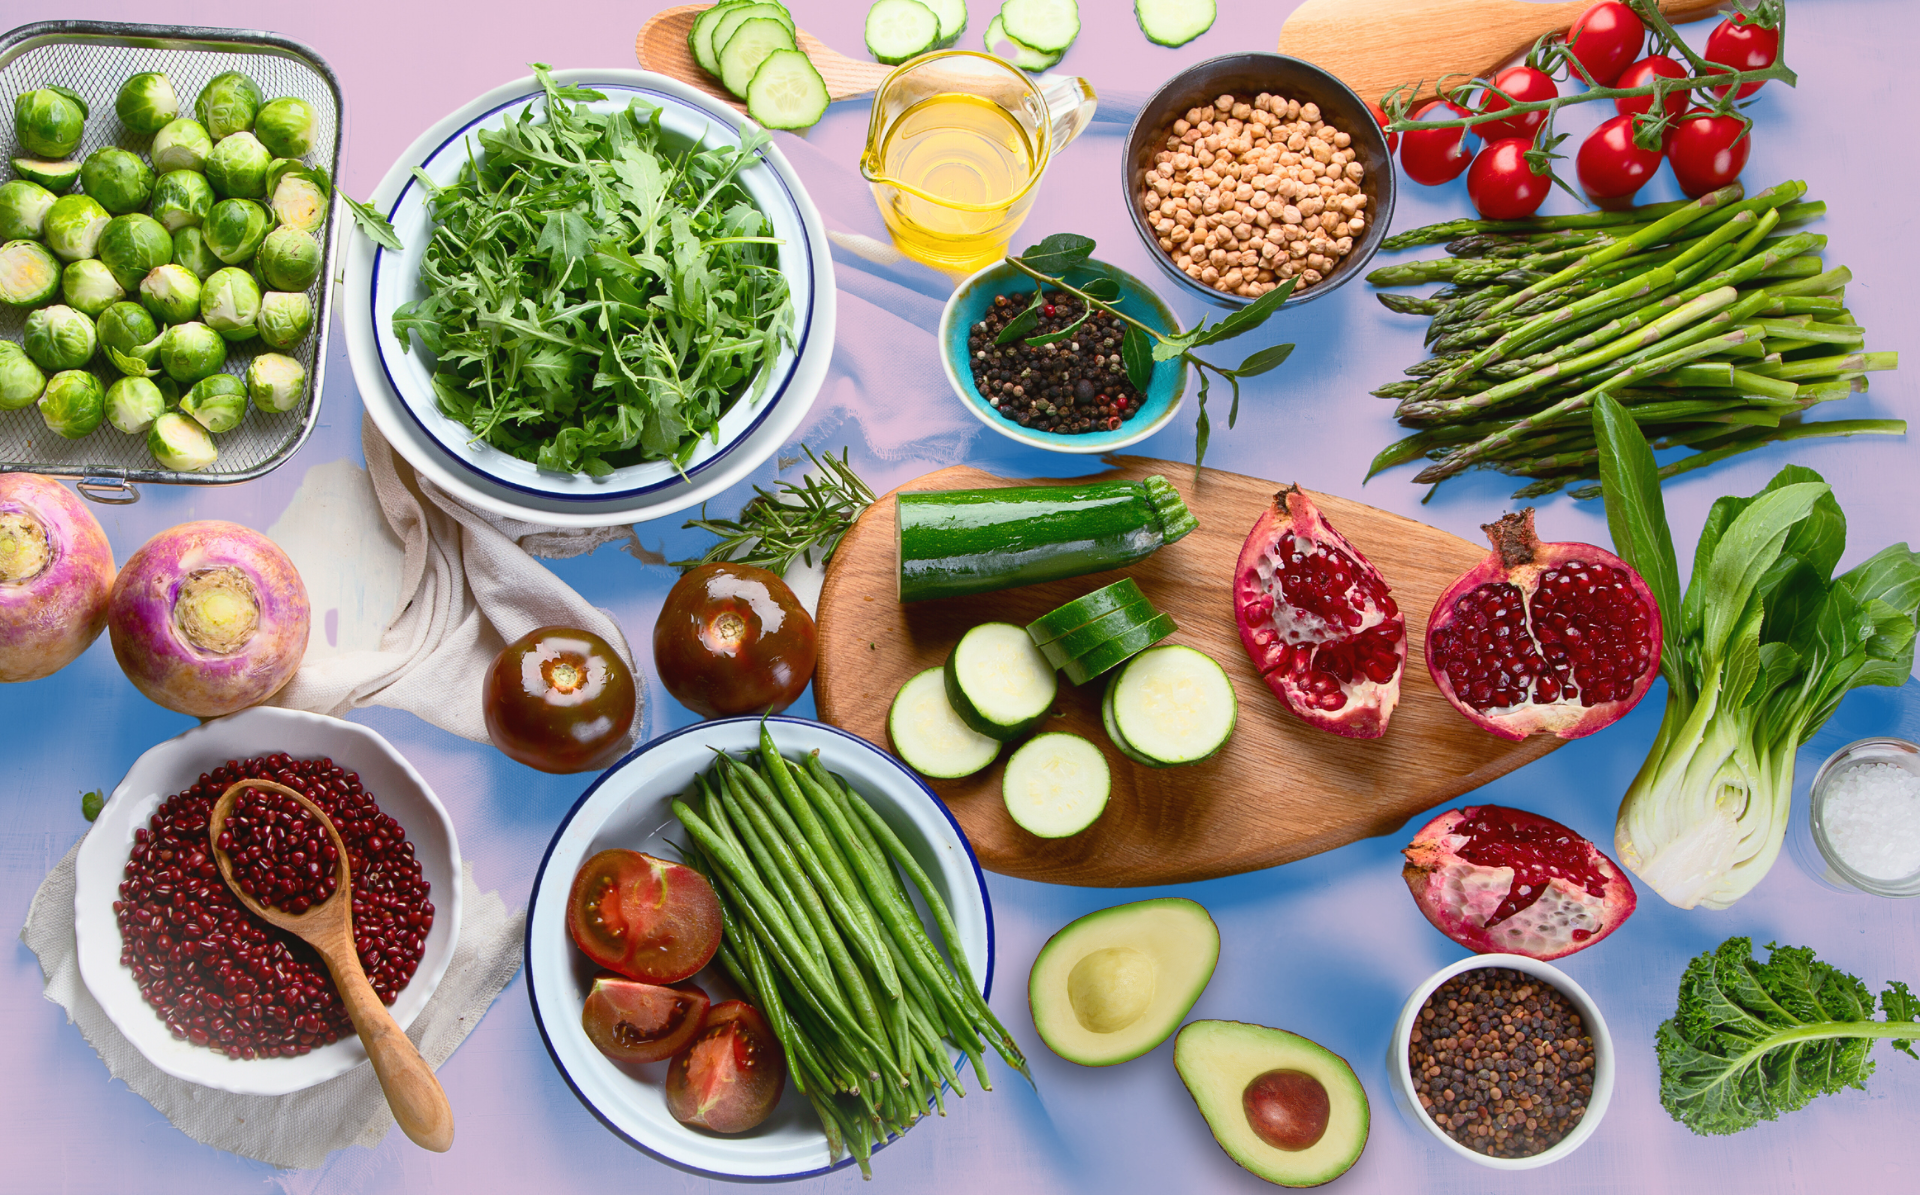 Hass Avocado board shares an array of vibrant foods on the table to explore healthy recipes that honor our culture.